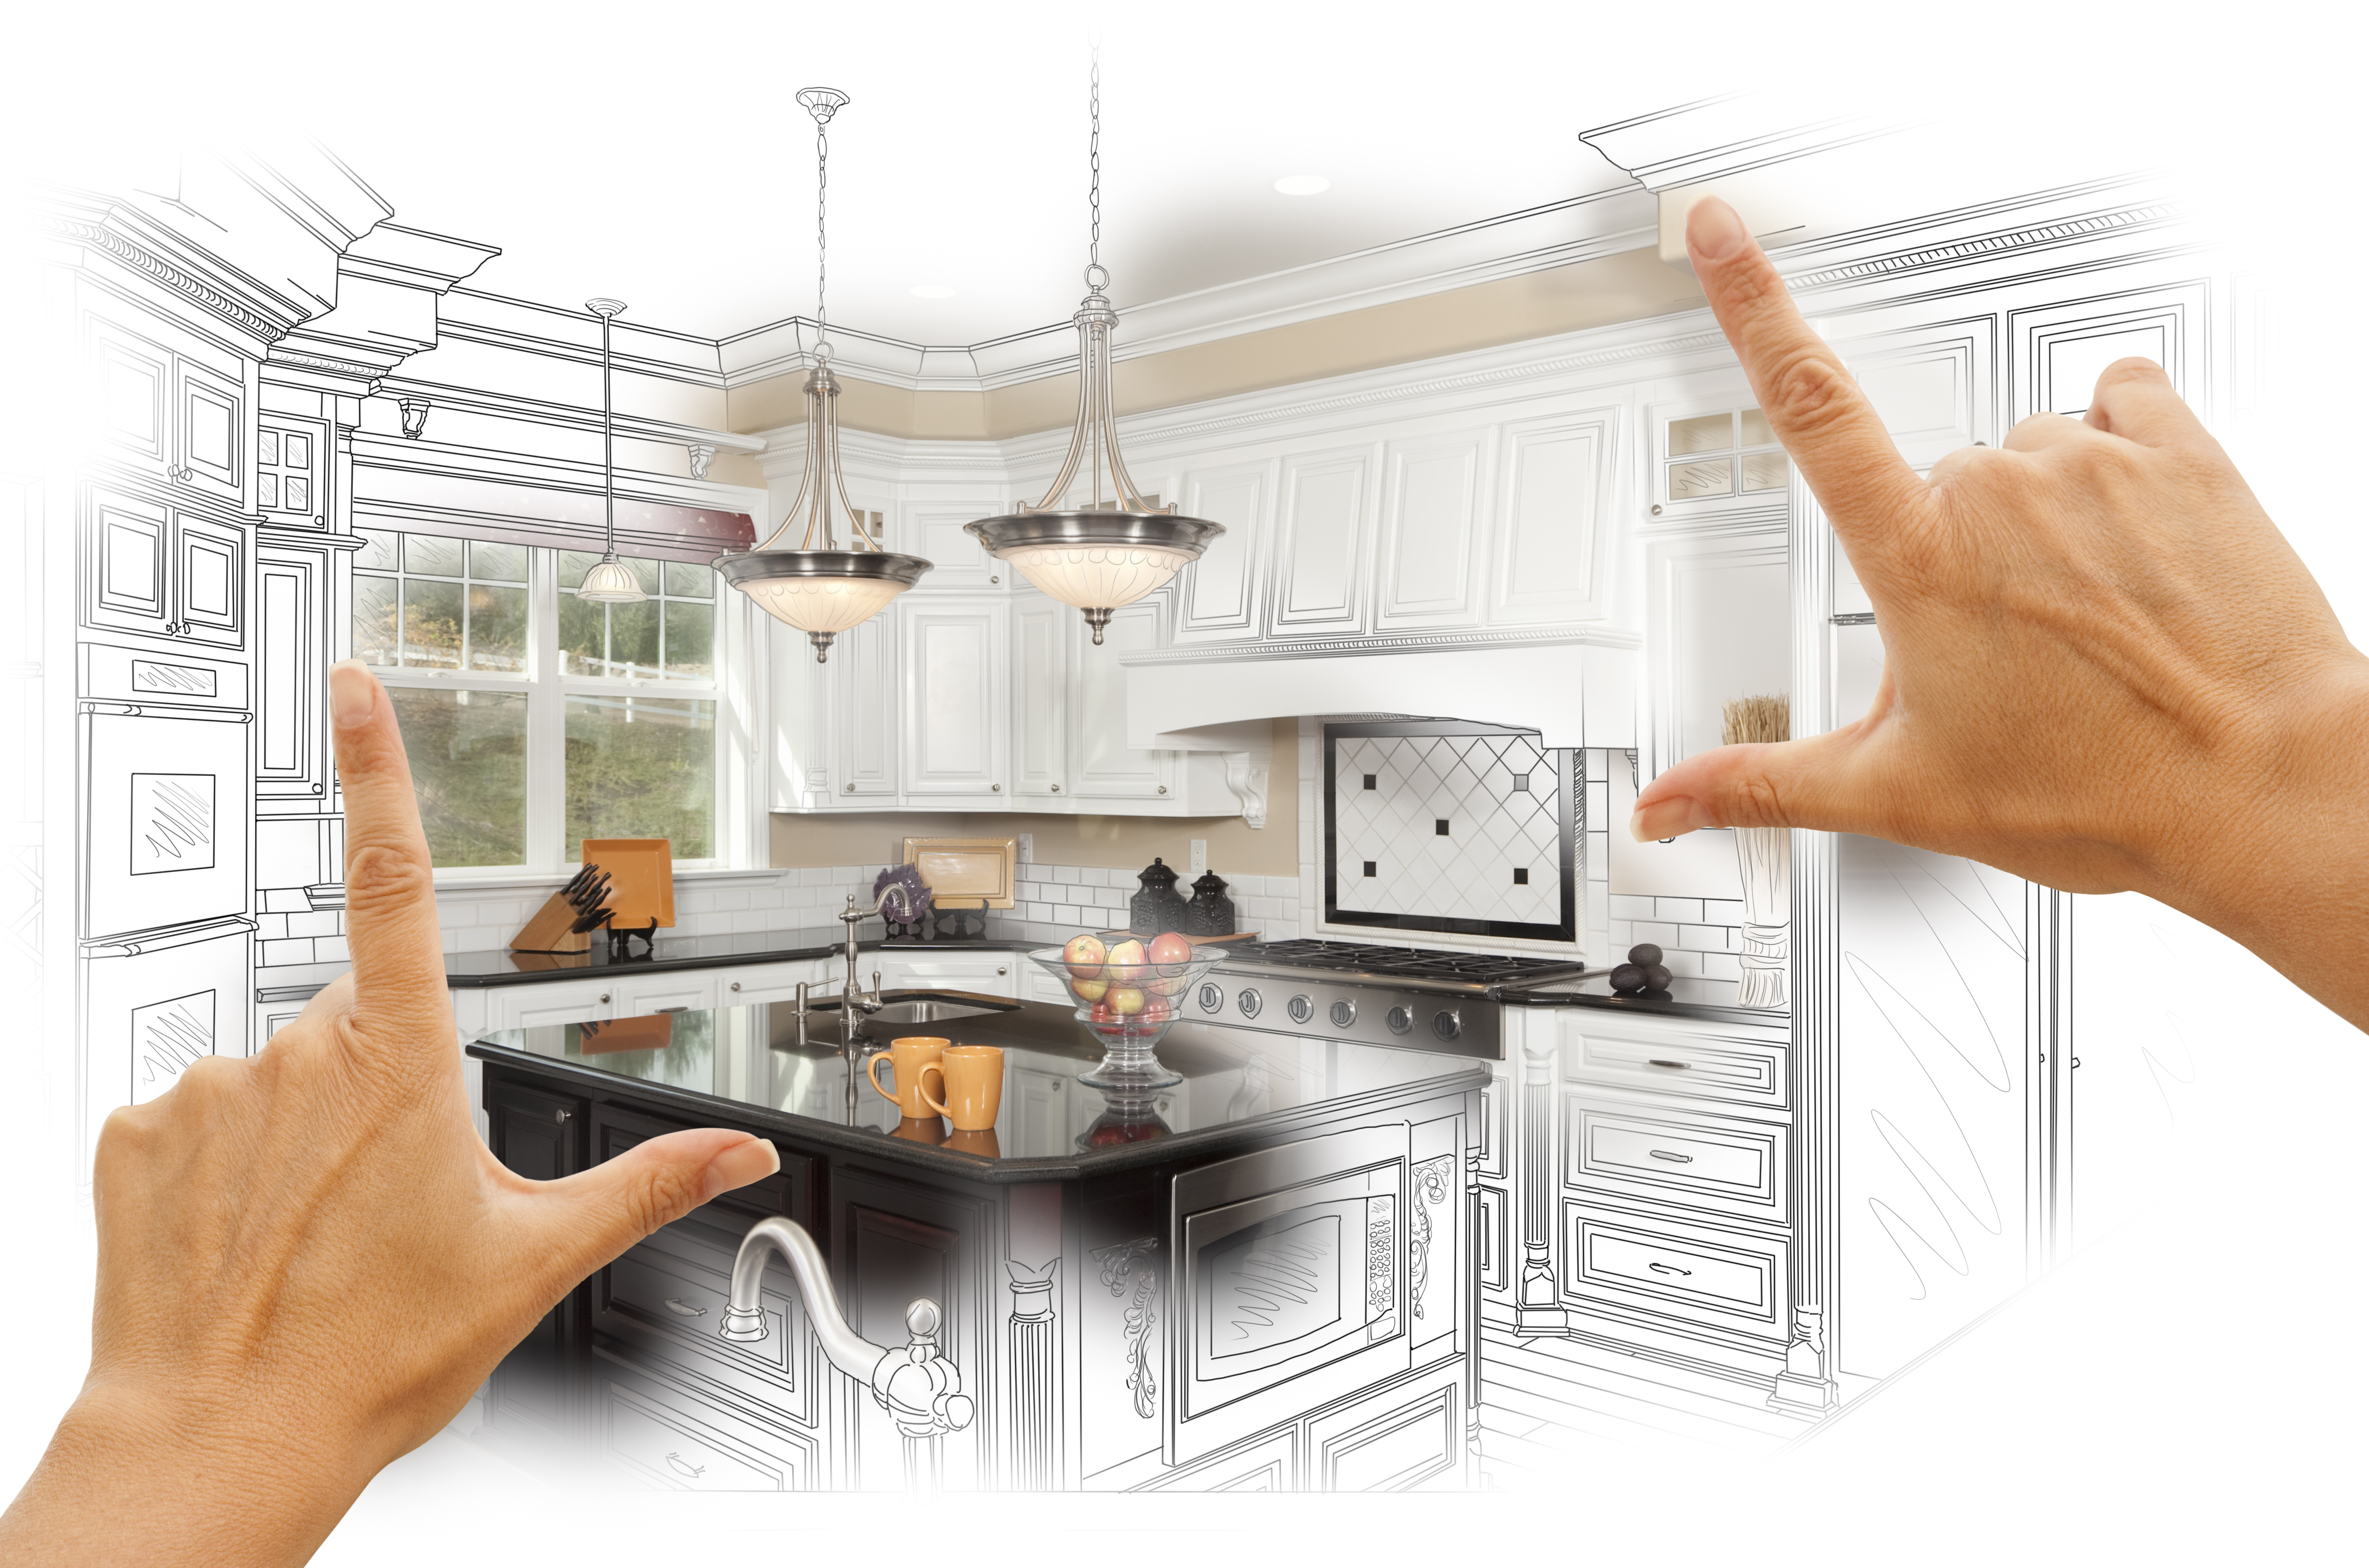 How to Rejuvenate Your Kitchen for Your Growing Family